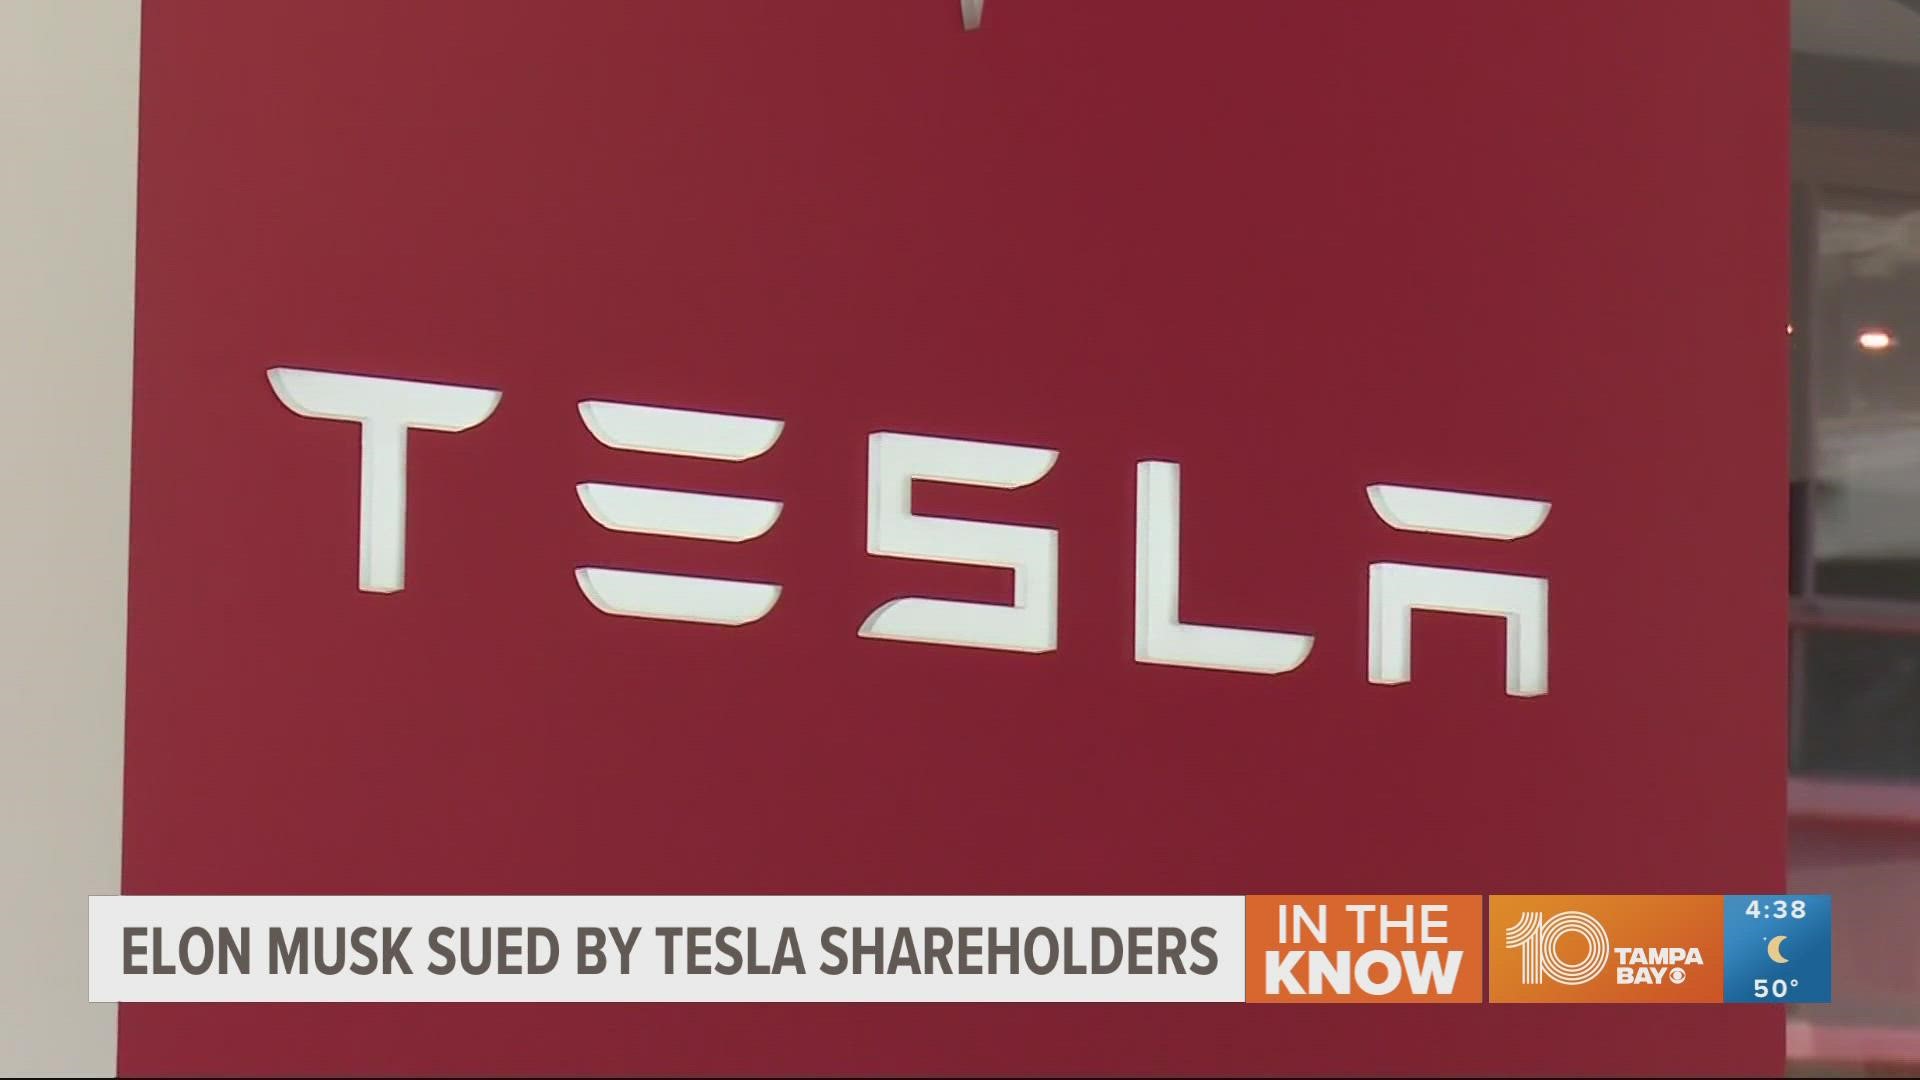 Telsa shareholders are taking Musk to court after he tweeted he could take Tesla private at $240 a share back in 2018.